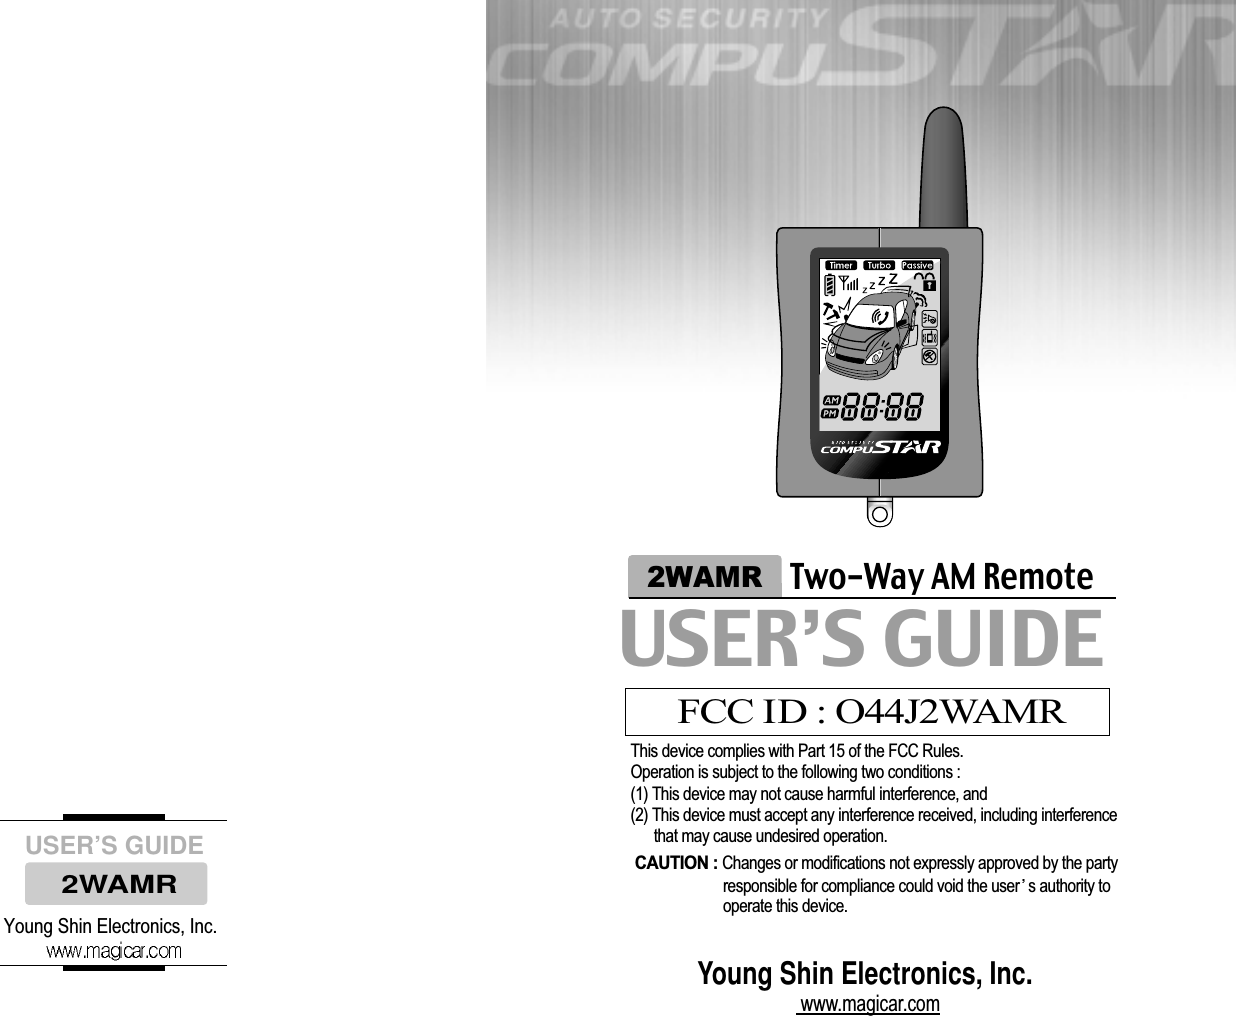 USER’S GUIDE2WAMRYoung Shin Electronics, Inc.Young Shin Electronics, Inc. www.magicar.comUSER’S GUIDE2WAMRTwo-Way AM RemoteFCC ID : O44J2WAMRThis device complies with Part 15 of the FCC Rules. Operation is subject to the following two conditions : (1) This device may not cause harmful interference, and(2) This device must accept any interference received, including interference that may cause undesired operation. CAUTION : Changes or modifications not expressly approved by the party responsible for compliance could void the user s authority to operate this device. 